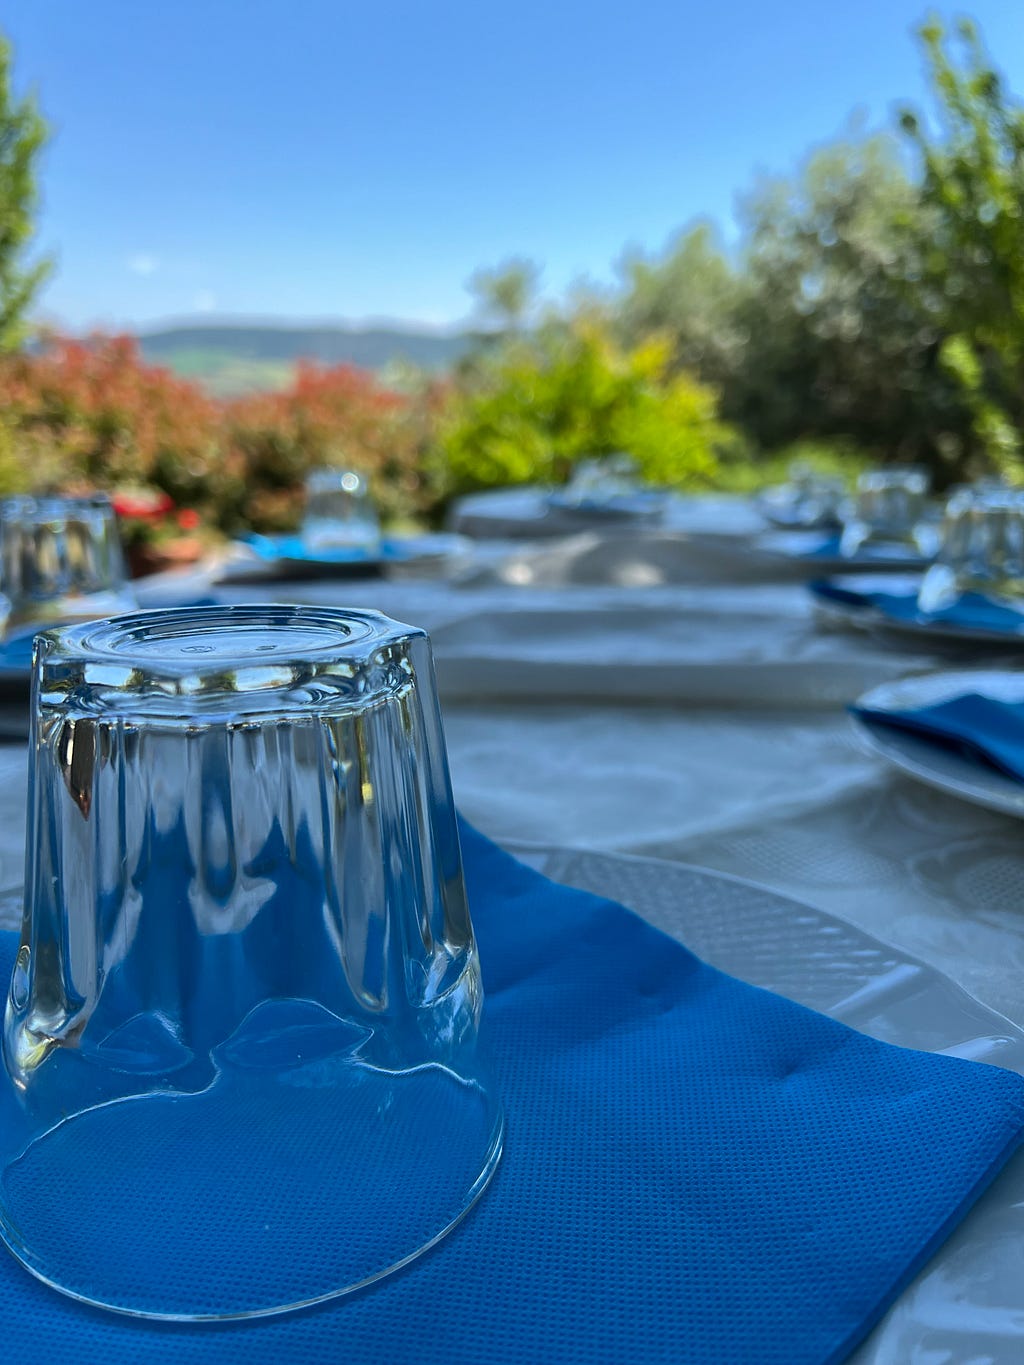 Close up photo of an outside lunch table with glasses, blue napkins, and while tablecolths. In the background are the far hills of the Val d’Orcia.